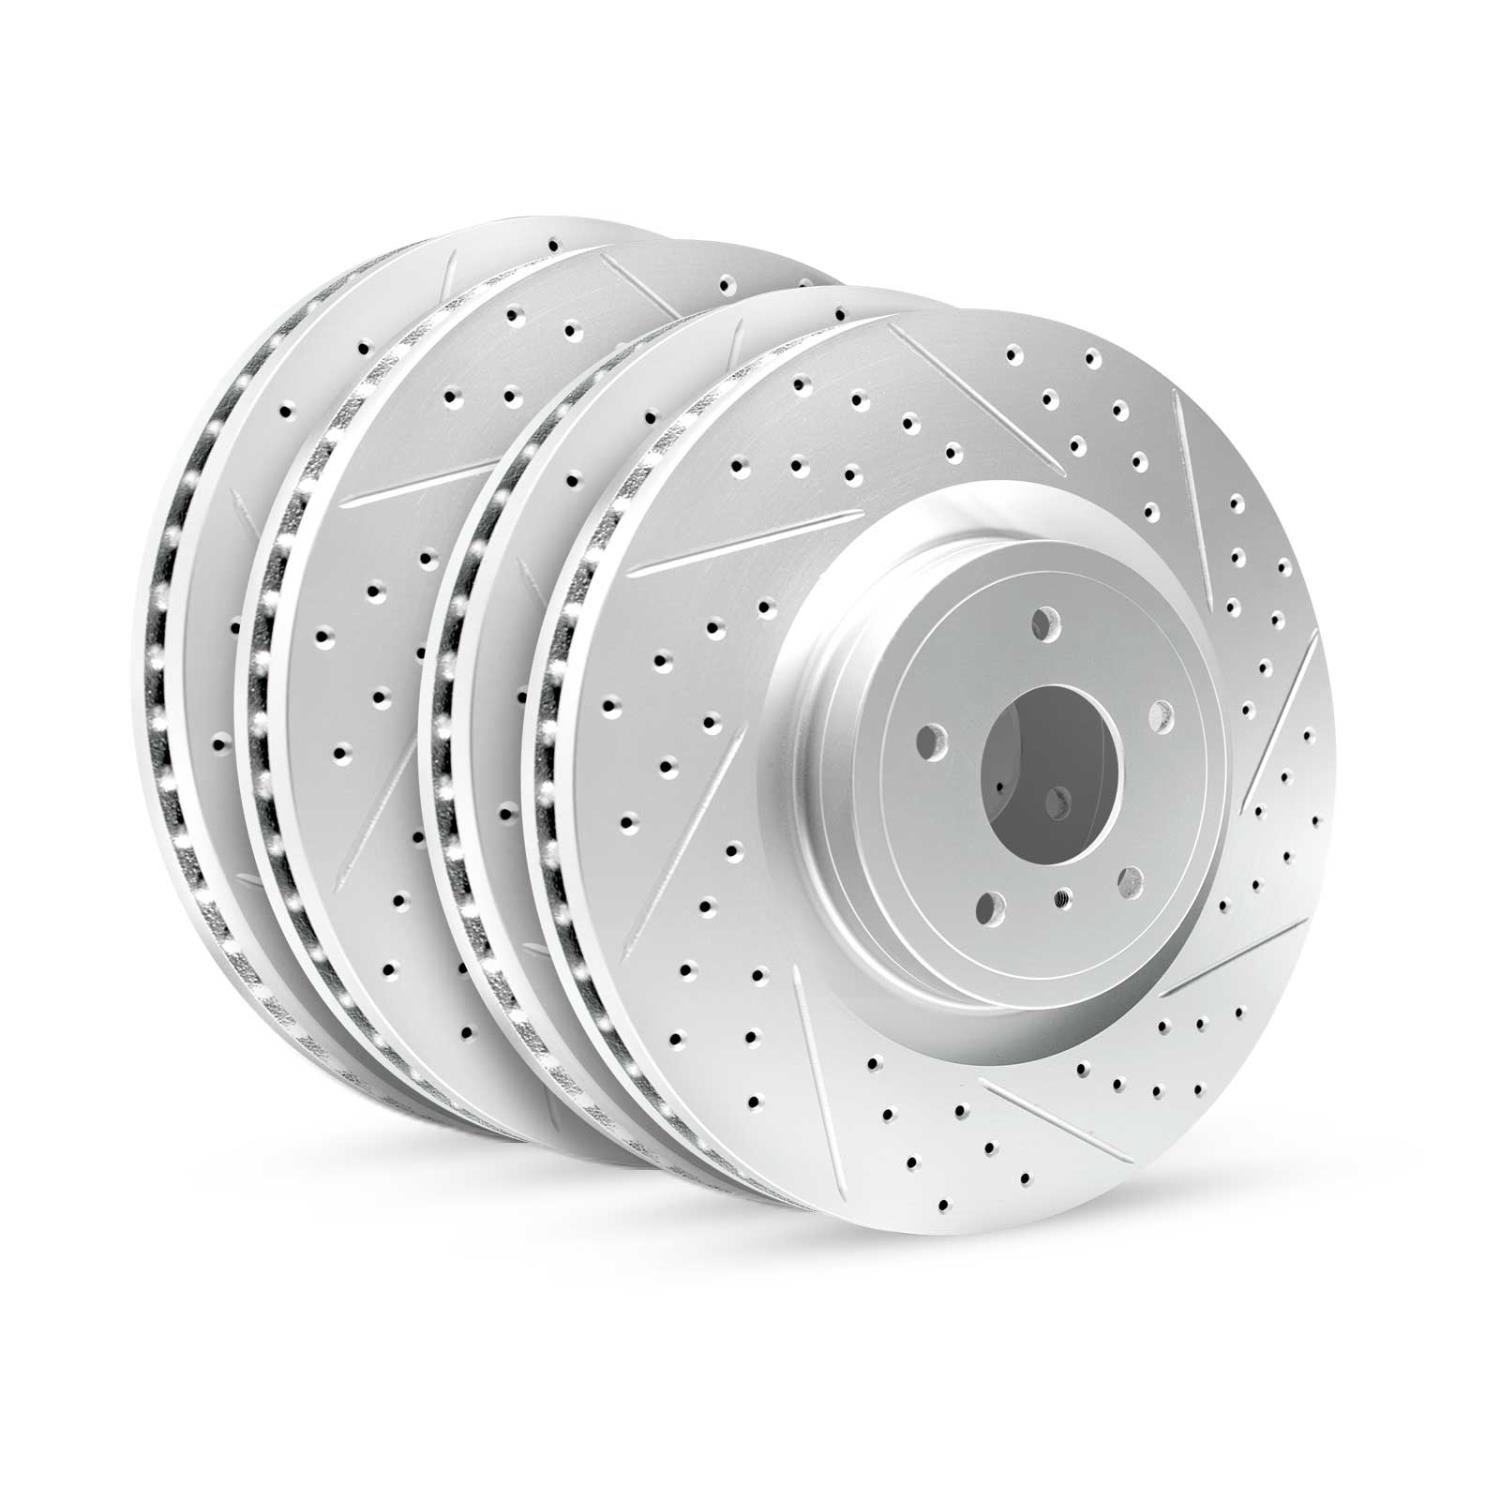 GEO-Carbon Drilled/Slotted Rotors, 2016-2017 Infiniti/Nissan,